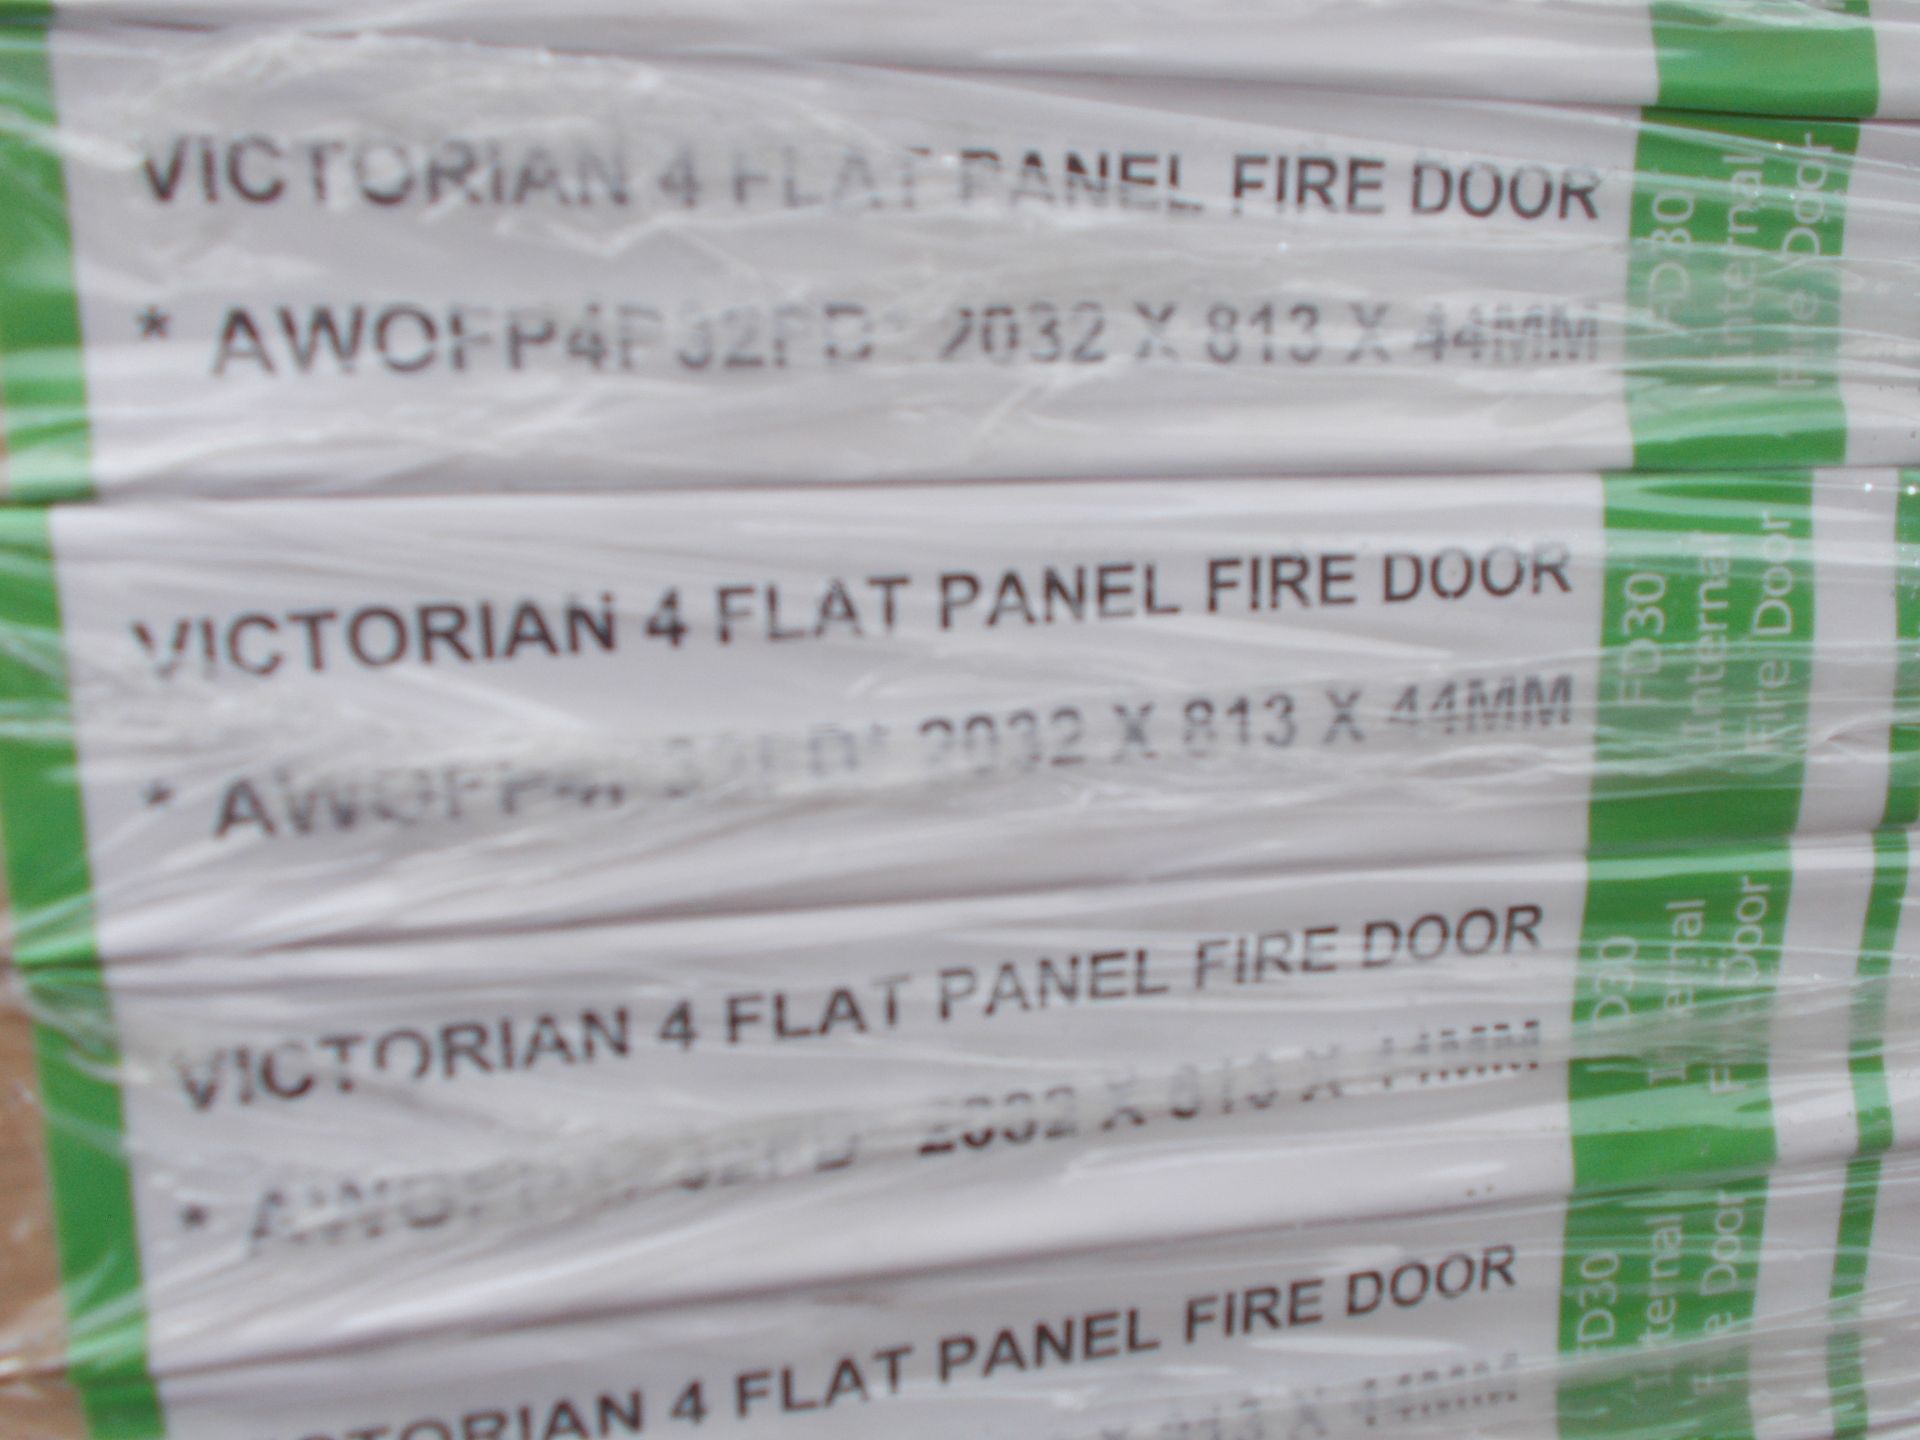 5 x Victorian 4 Flat Panel FD30 Int Fire Door AWOFP4P32FD, 2032x813x44mm - Lots to be handed out - Image 3 of 3